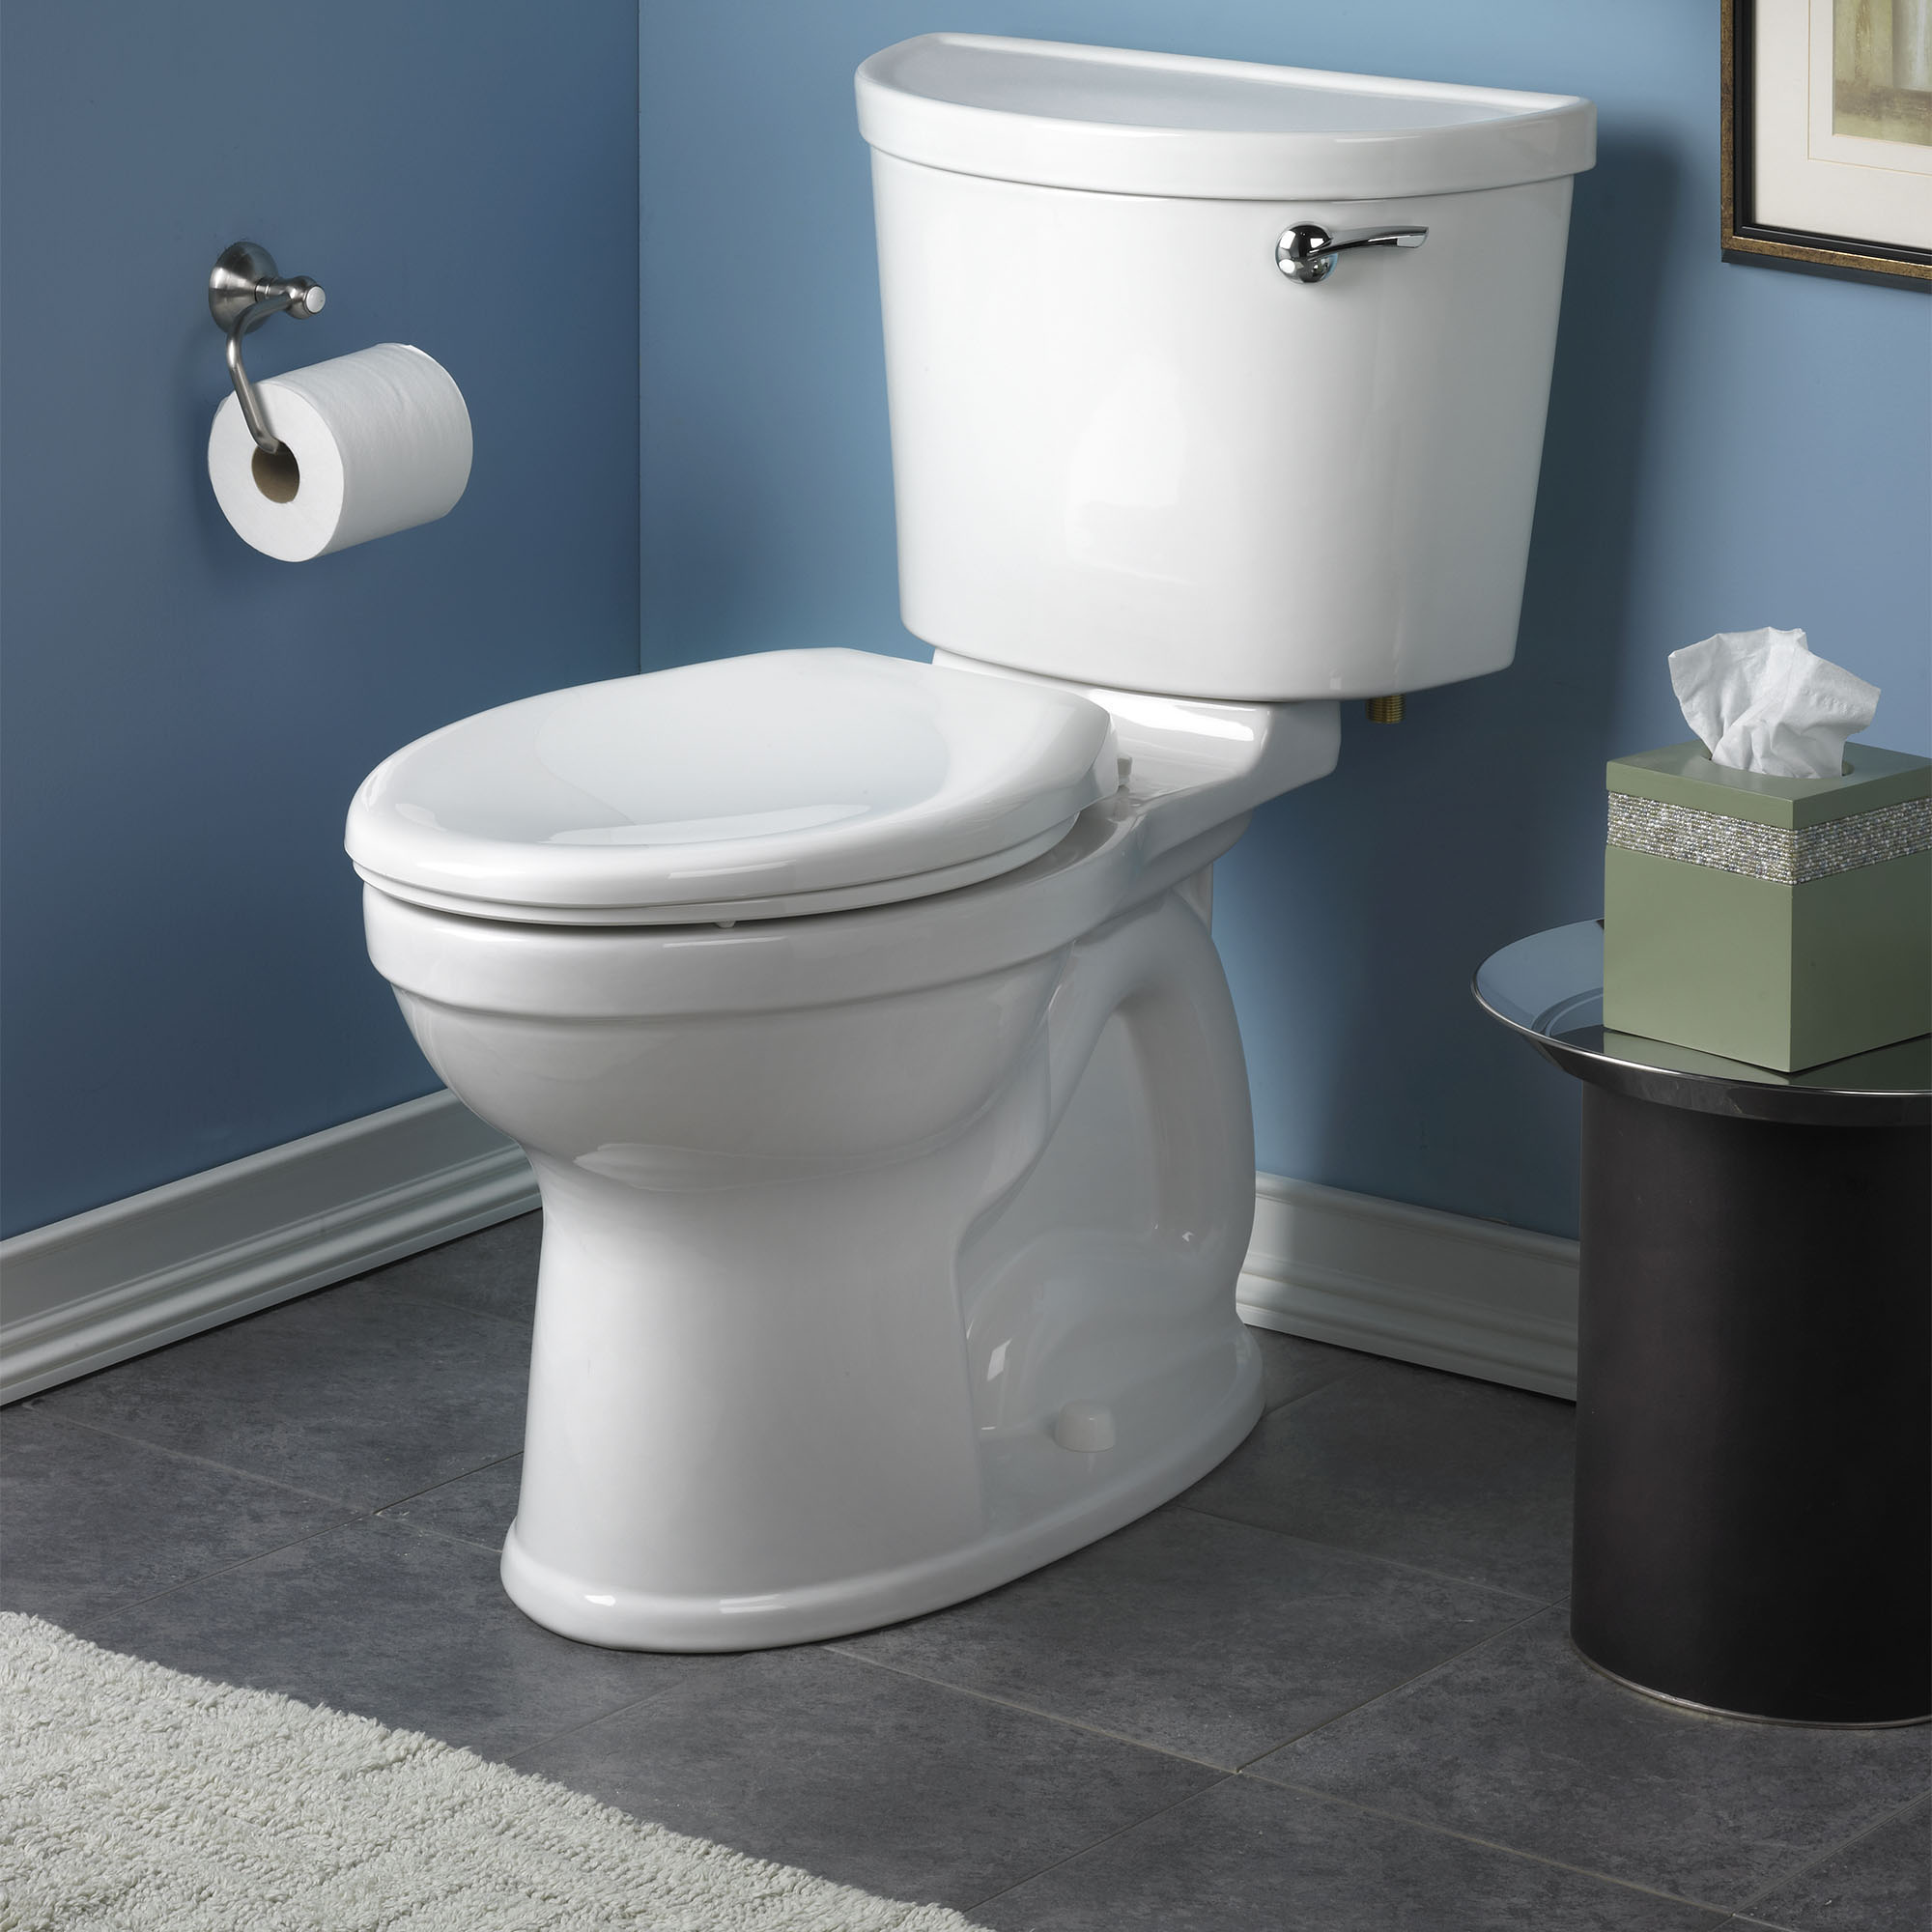 Champion PRO Two-Piece 1.28 gpf/4.8 Lpf Chair Height Elongated Right-Hand Trip Lever Toilet Less Seat